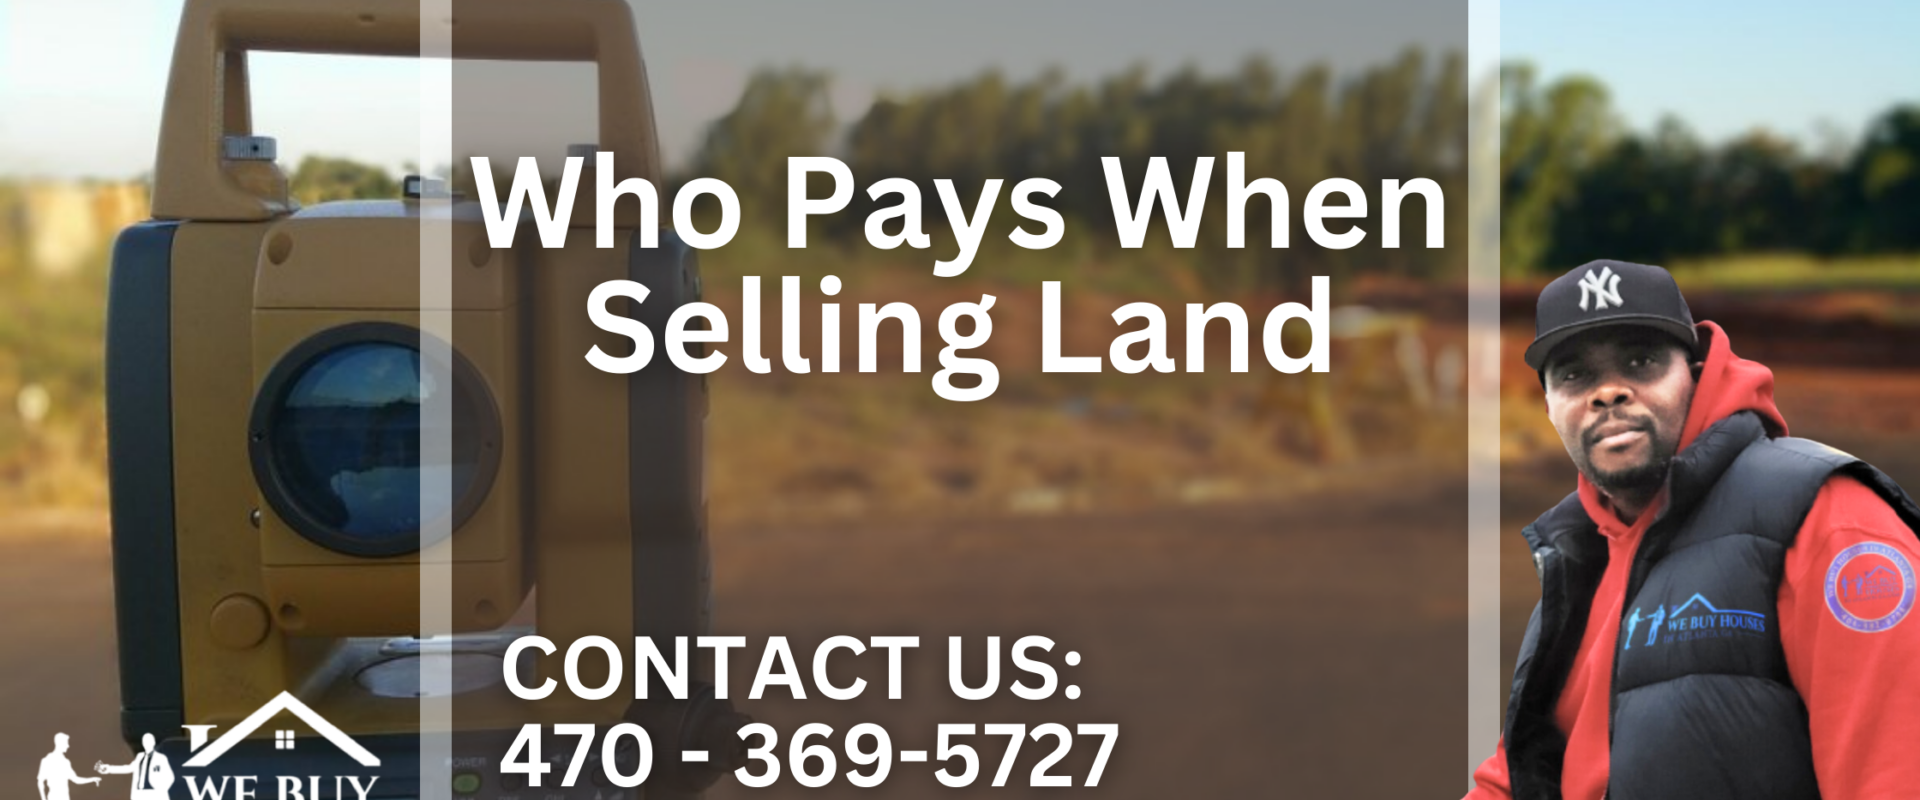 Who Pays When Selling Land